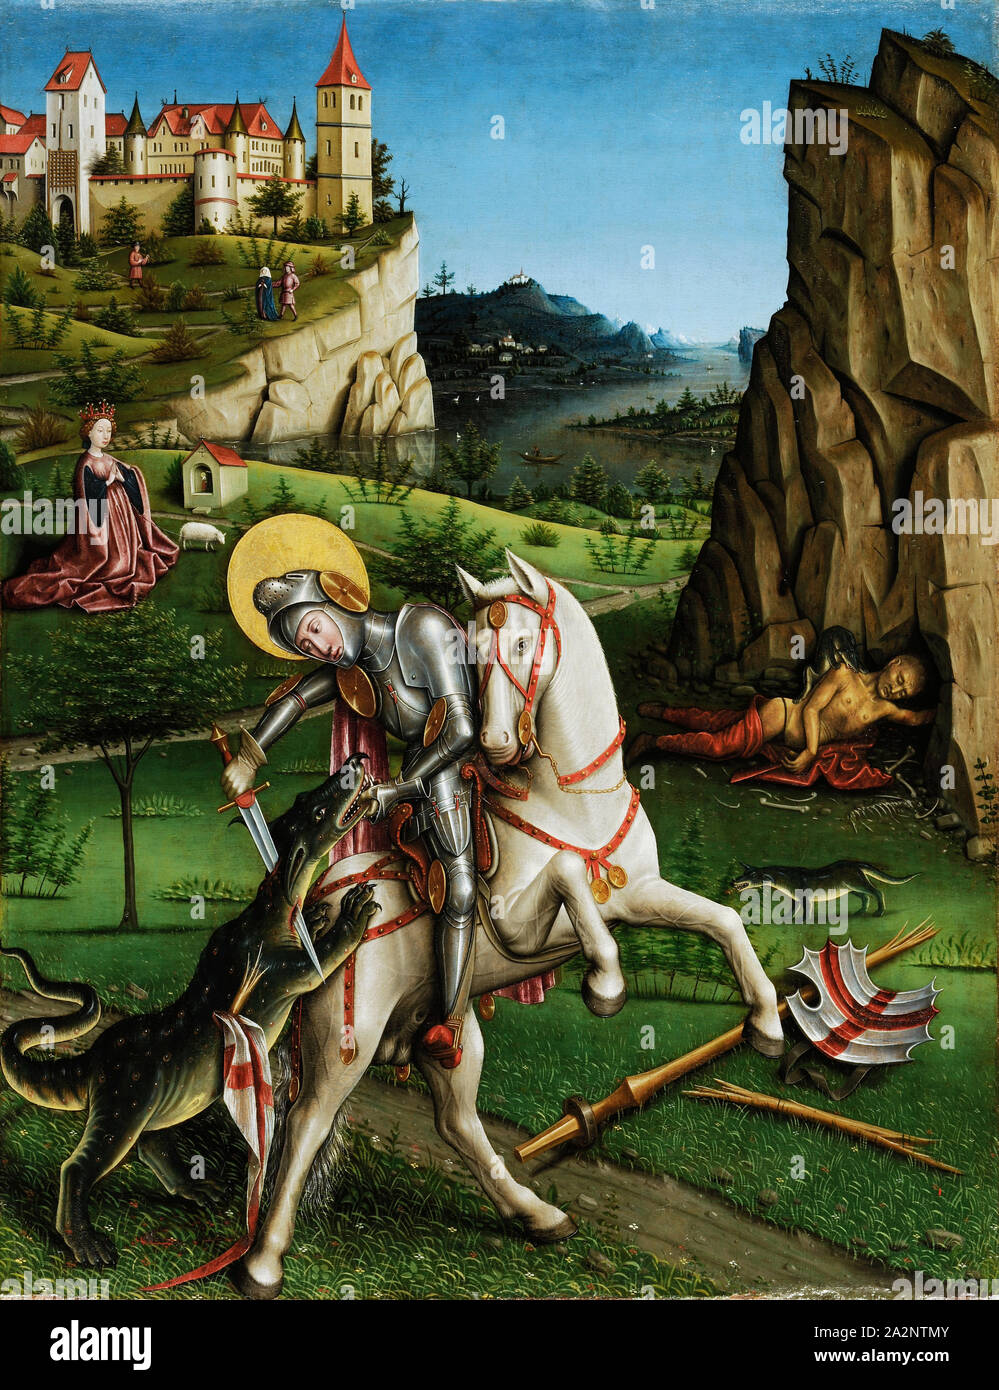 The Dragon Battle of St., Georg (inside), The Lamentation of Christ under the cross (outside), c. 1445-1450, mixed technique on fir wood, 144 x 110.5 cm, unmarked, Meister von Sierentz Stock Photo